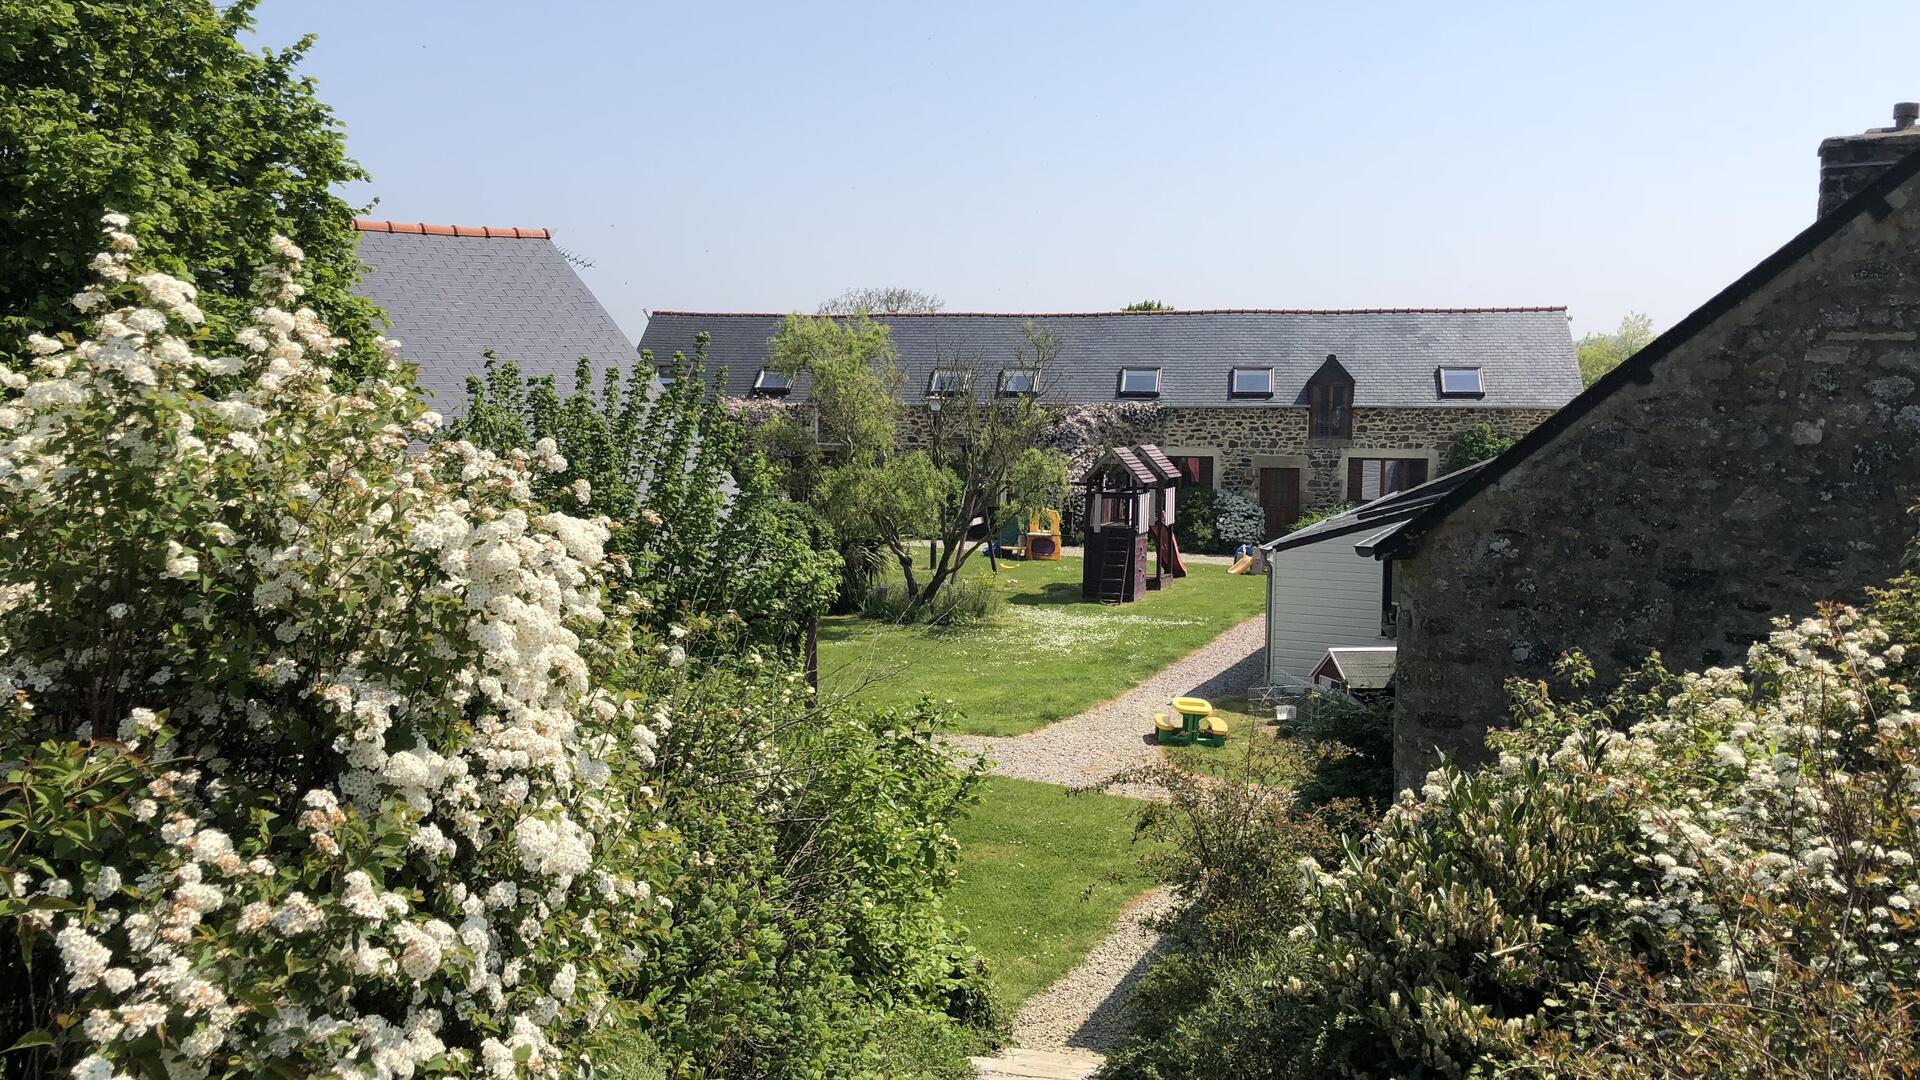 4 Bedroom Private cottage/shared facilities in Brittany, France